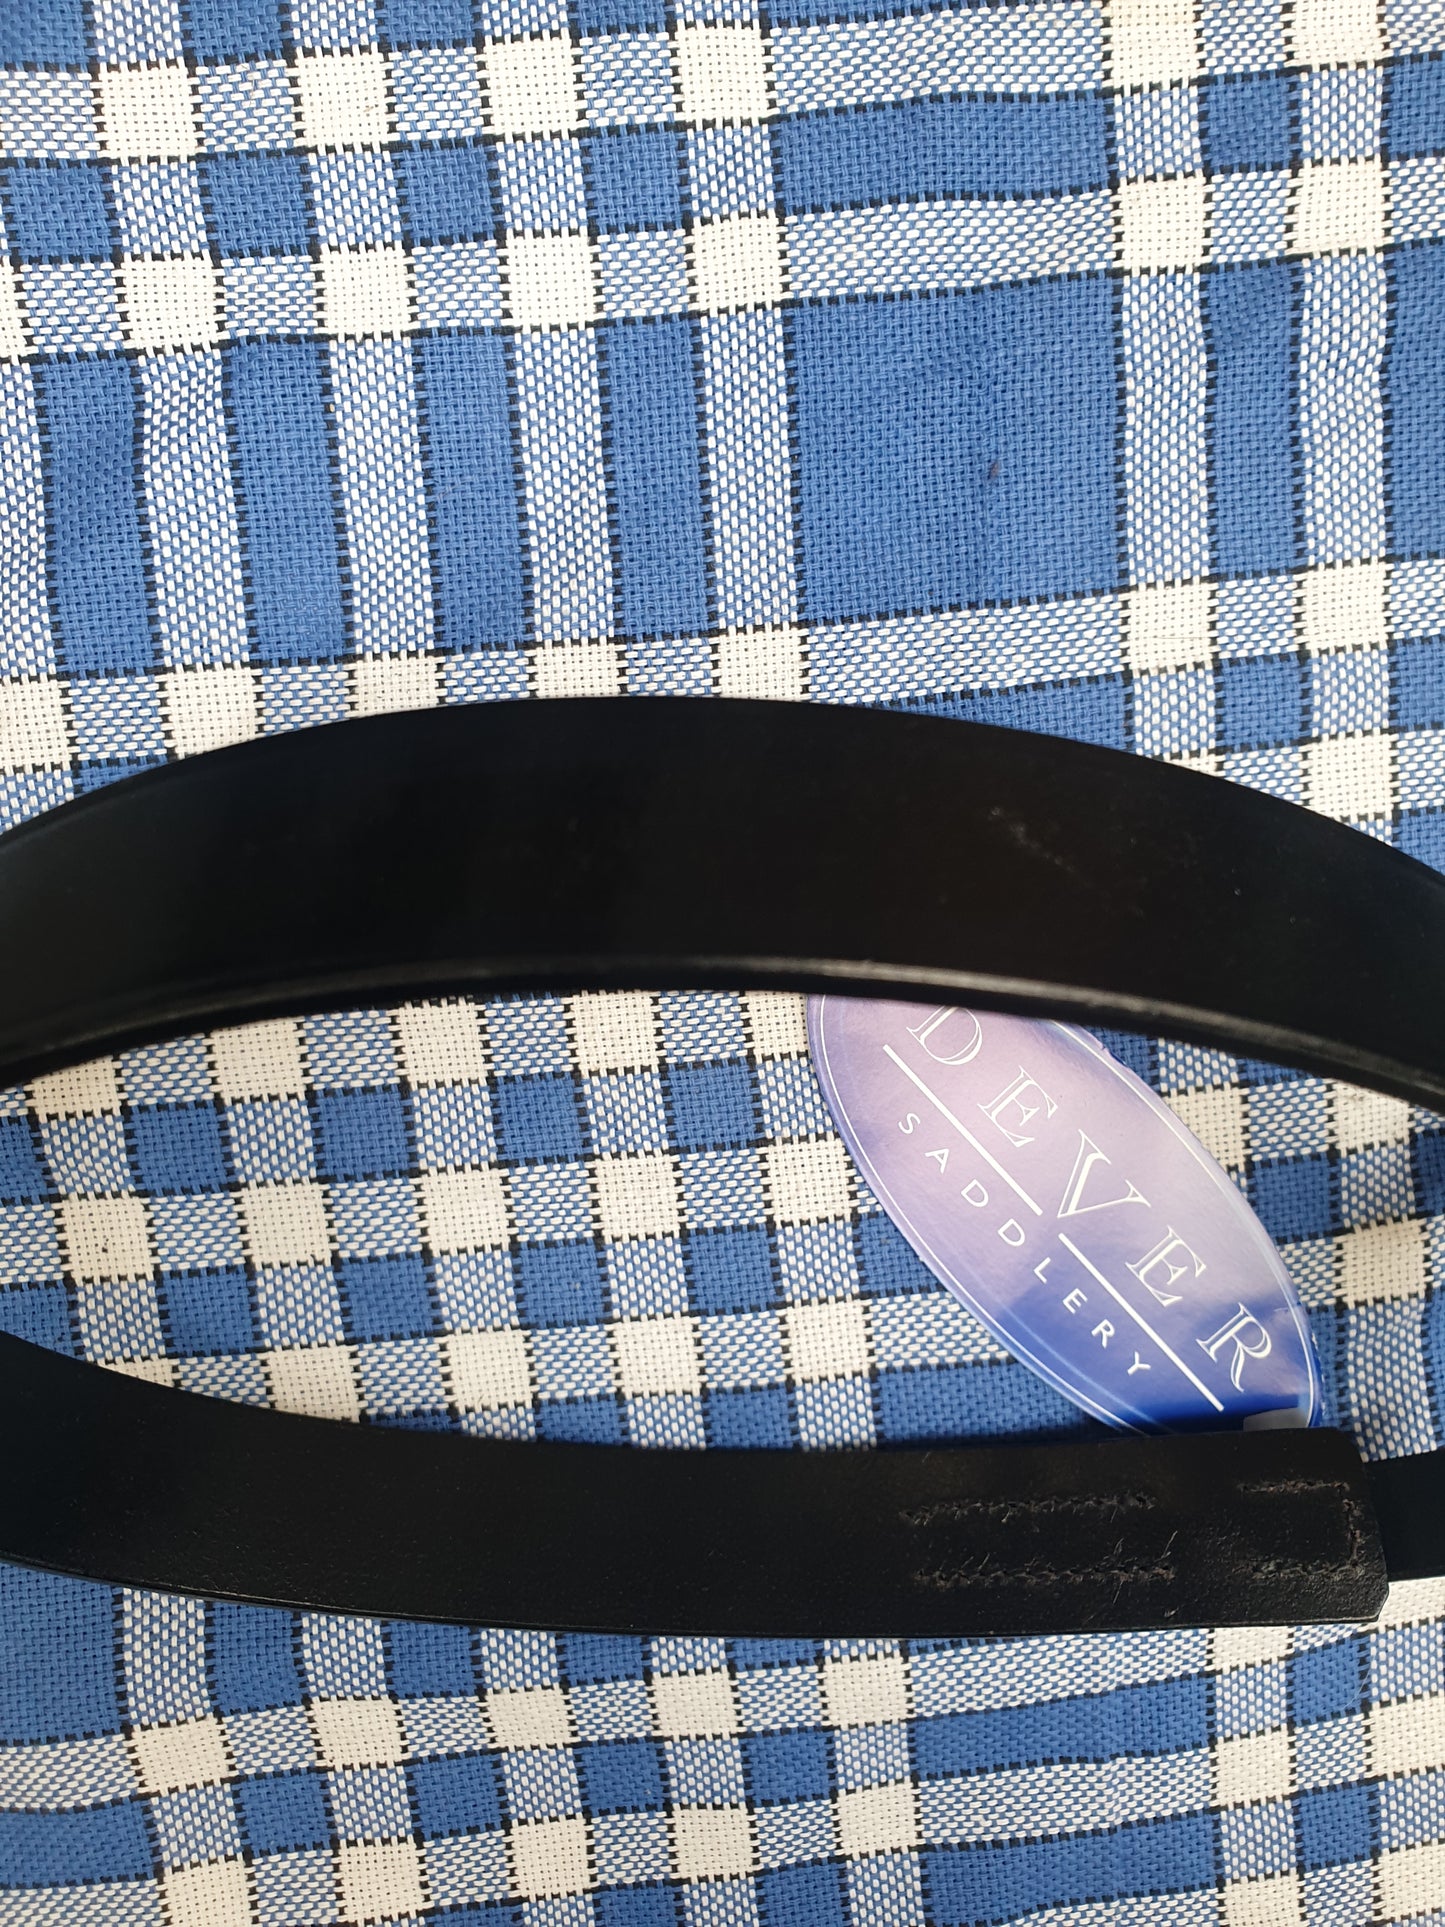 NEW dever Saddlery nose band, black leather sizes cob and x full FREE POSTAGE *